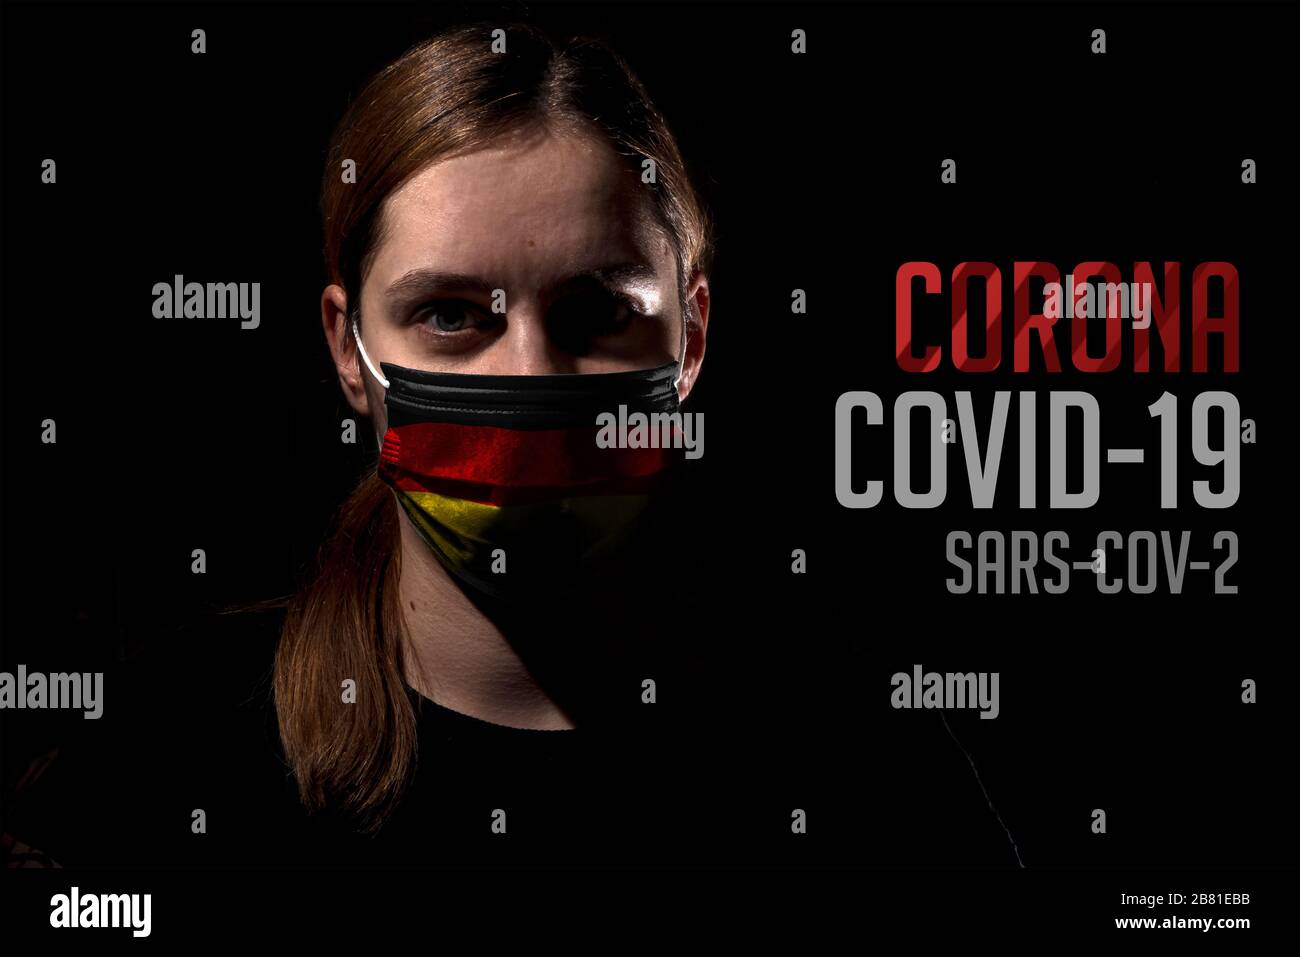 Woman wearing mask with Germany flag for protection of corona virus covid-19 SARS-CoV-2, woman with mask on black background Stock Photo